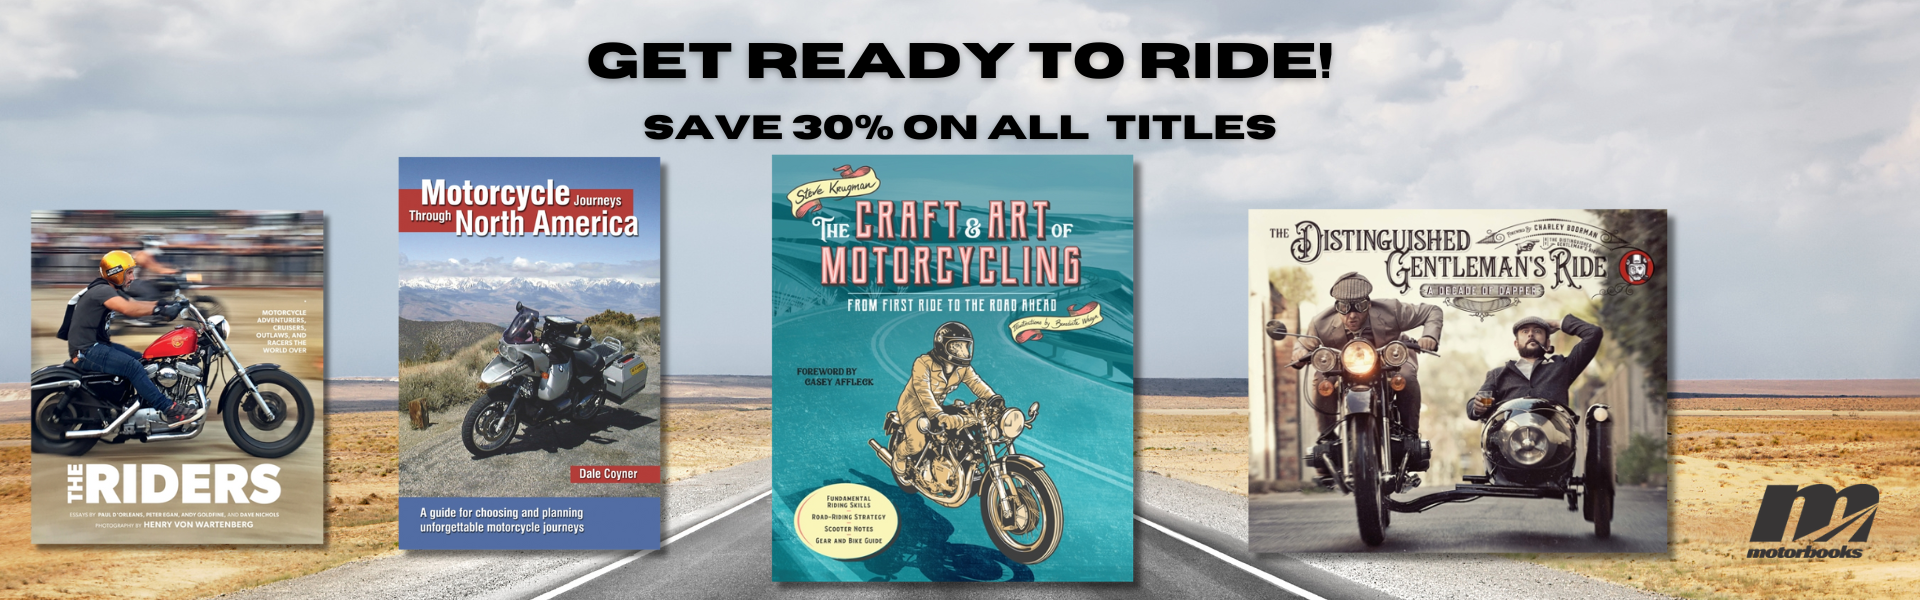 Motorcycles_March Banner